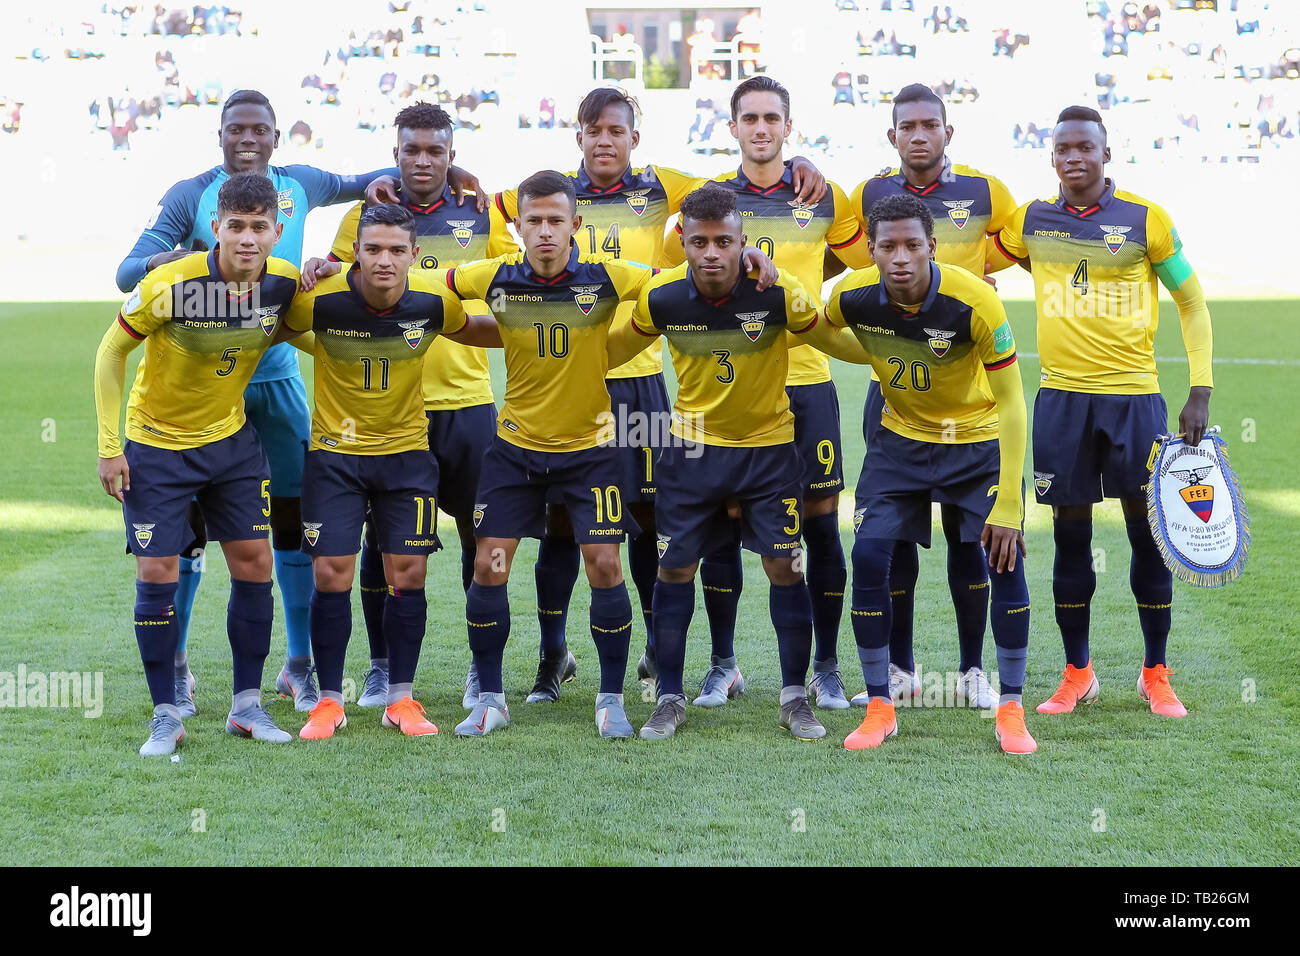 Gdynia, Poland. 29th May, 2019. National team of Ecuador are seen pose for a photo before the start of the match during FIFA U-20 World Cup match between Ecuador and Mexico (GROUP B) in Gdynia. (Final score; Ecuador 1:0 Mexico ) Credit: Tomasz Zasinski/Alamy Live News Stock Photo